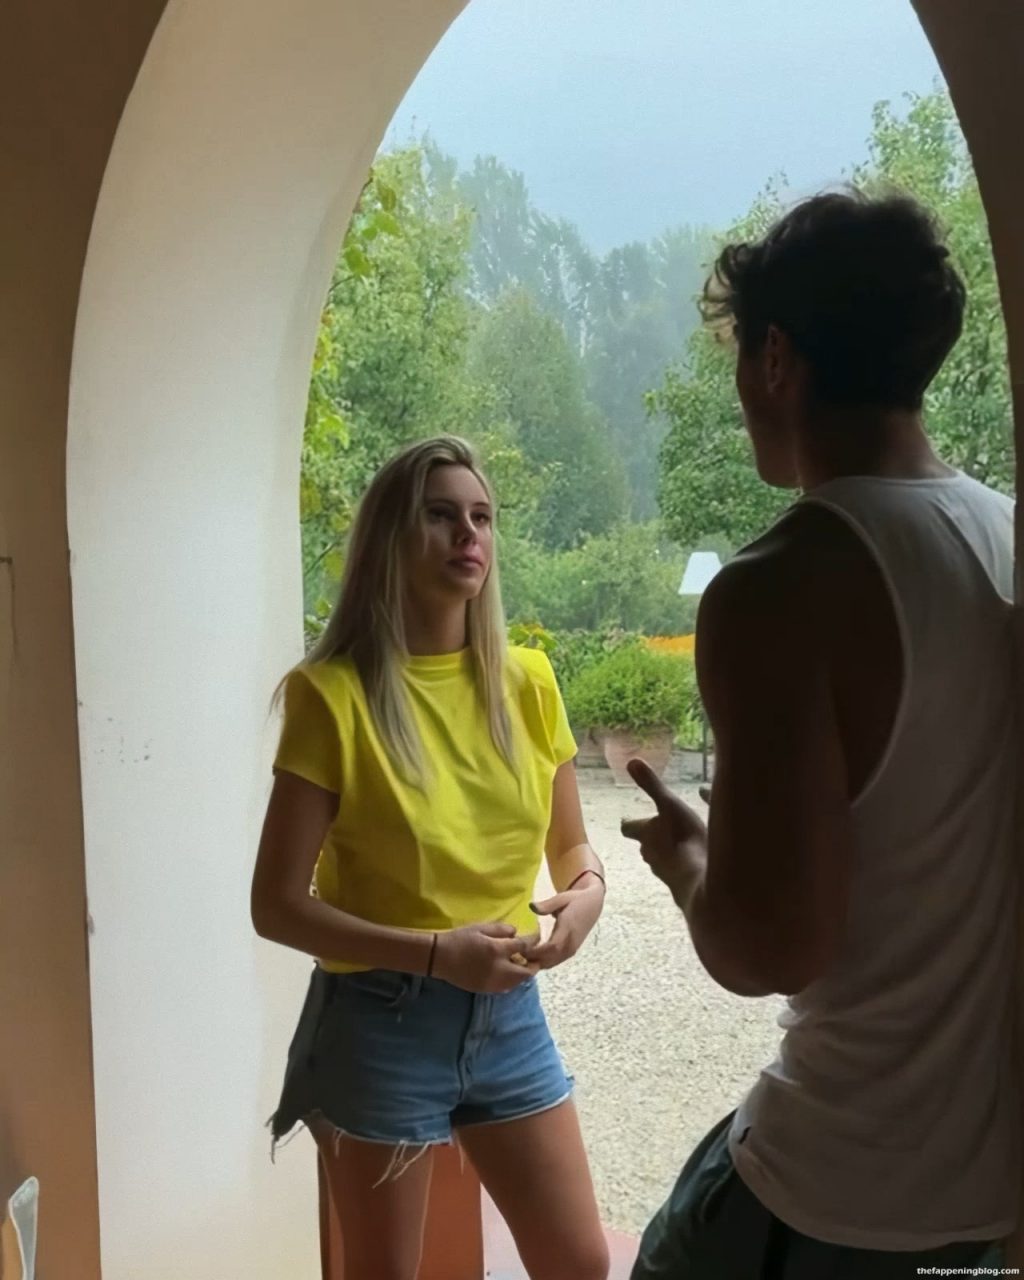 Braless Lele Pons Shakes Her Tits to Get Attention (5 Pics + Video)